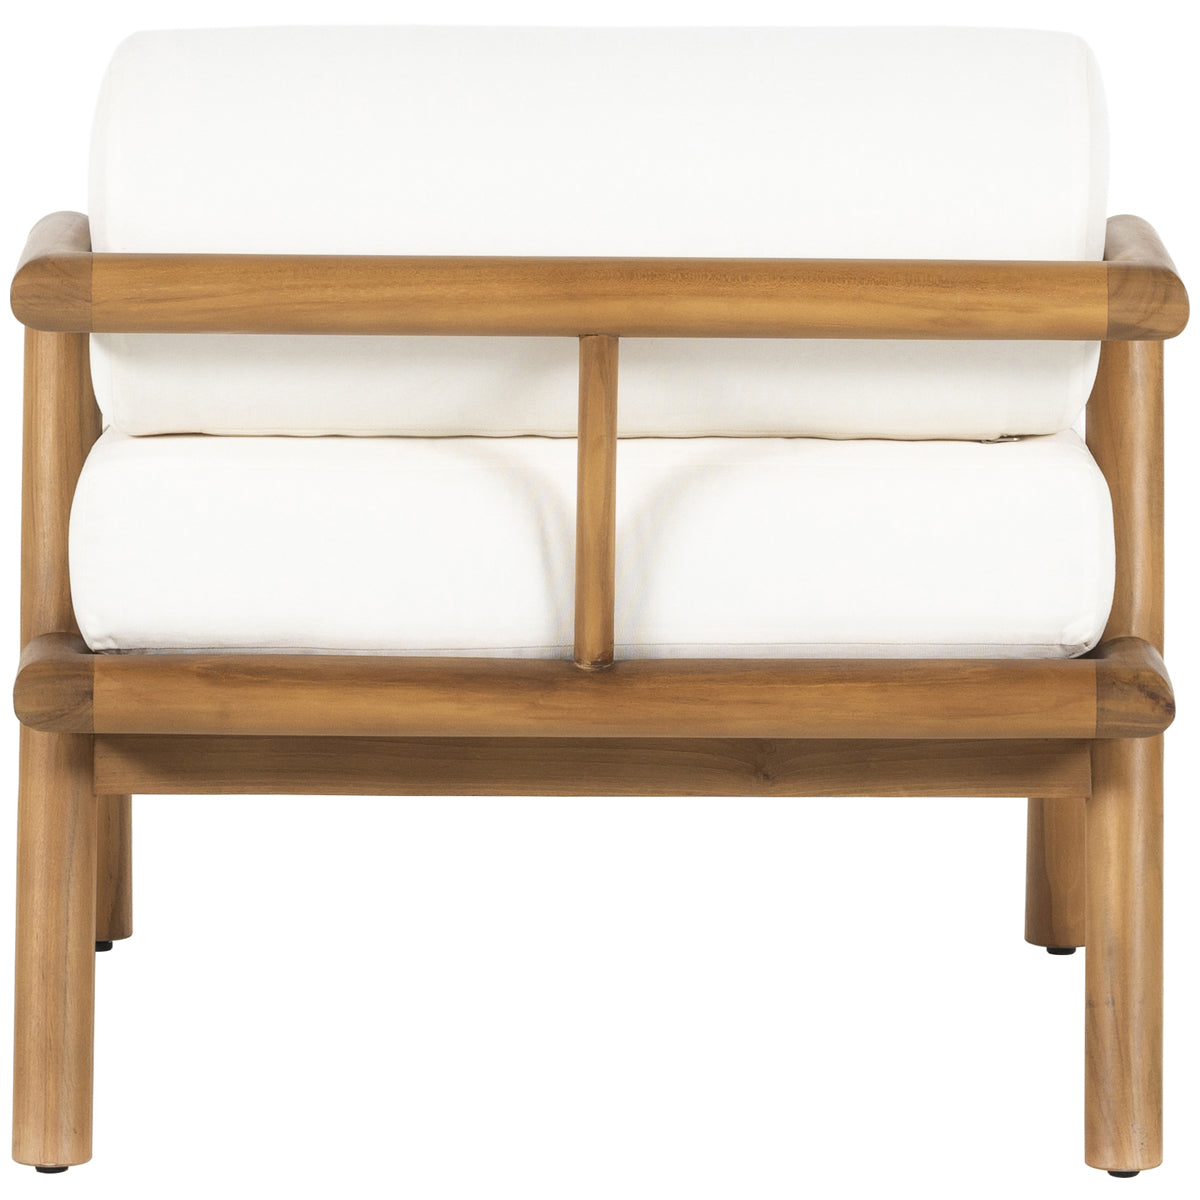 Four Hands Solano Emmy Outdoor Chair - Natural Teak